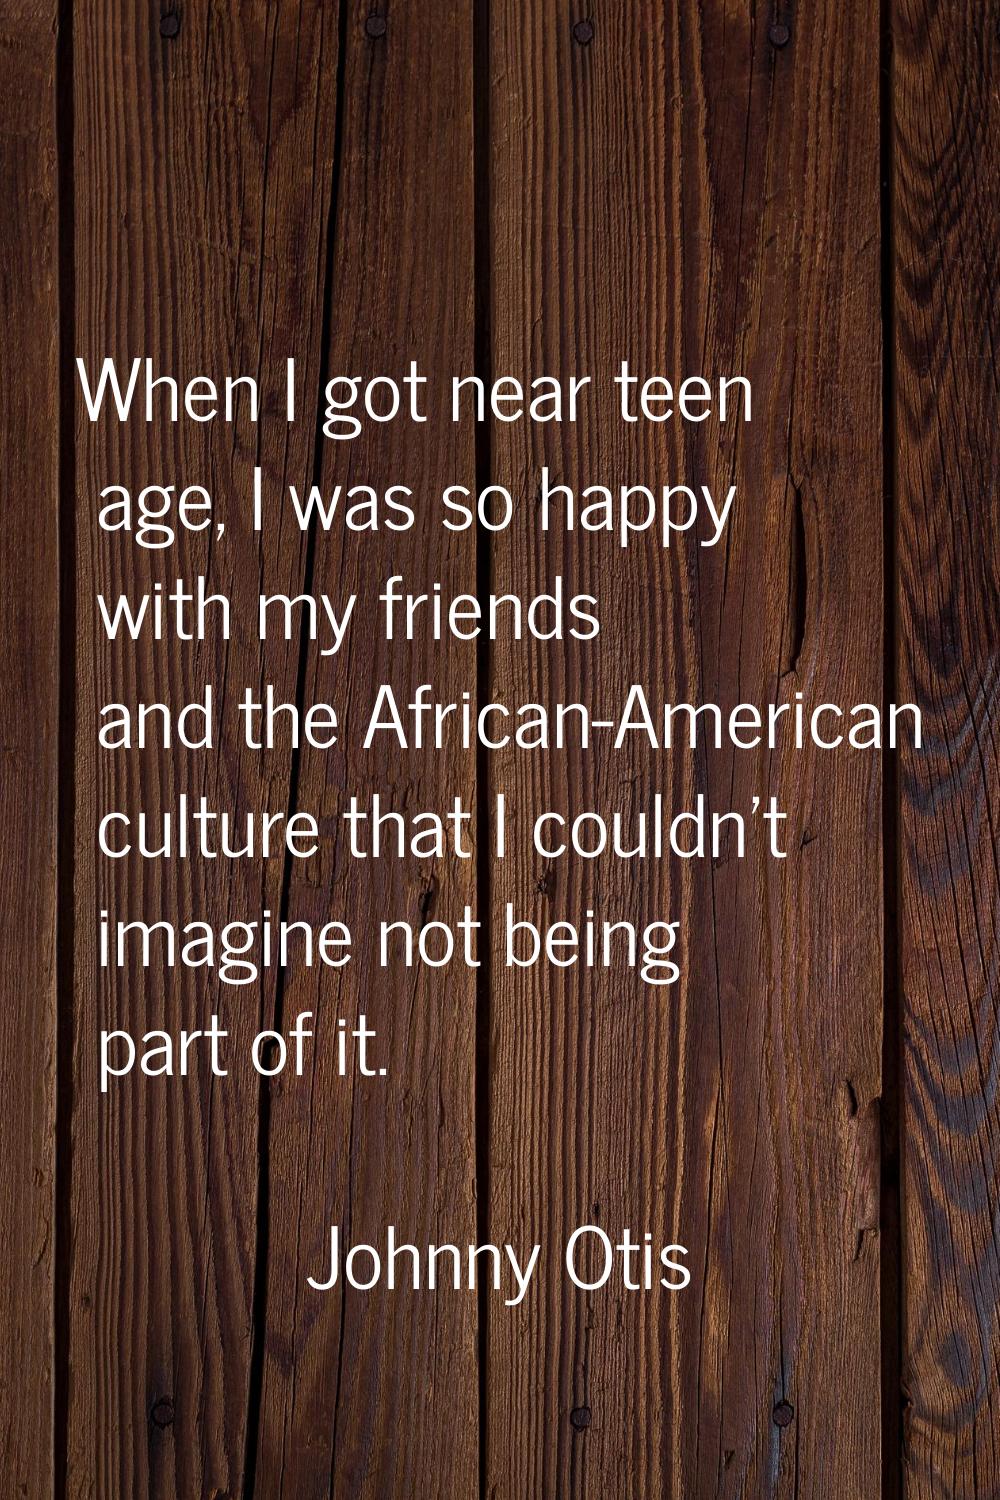 When I got near teen age, I was so happy with my friends and the African-American culture that I co